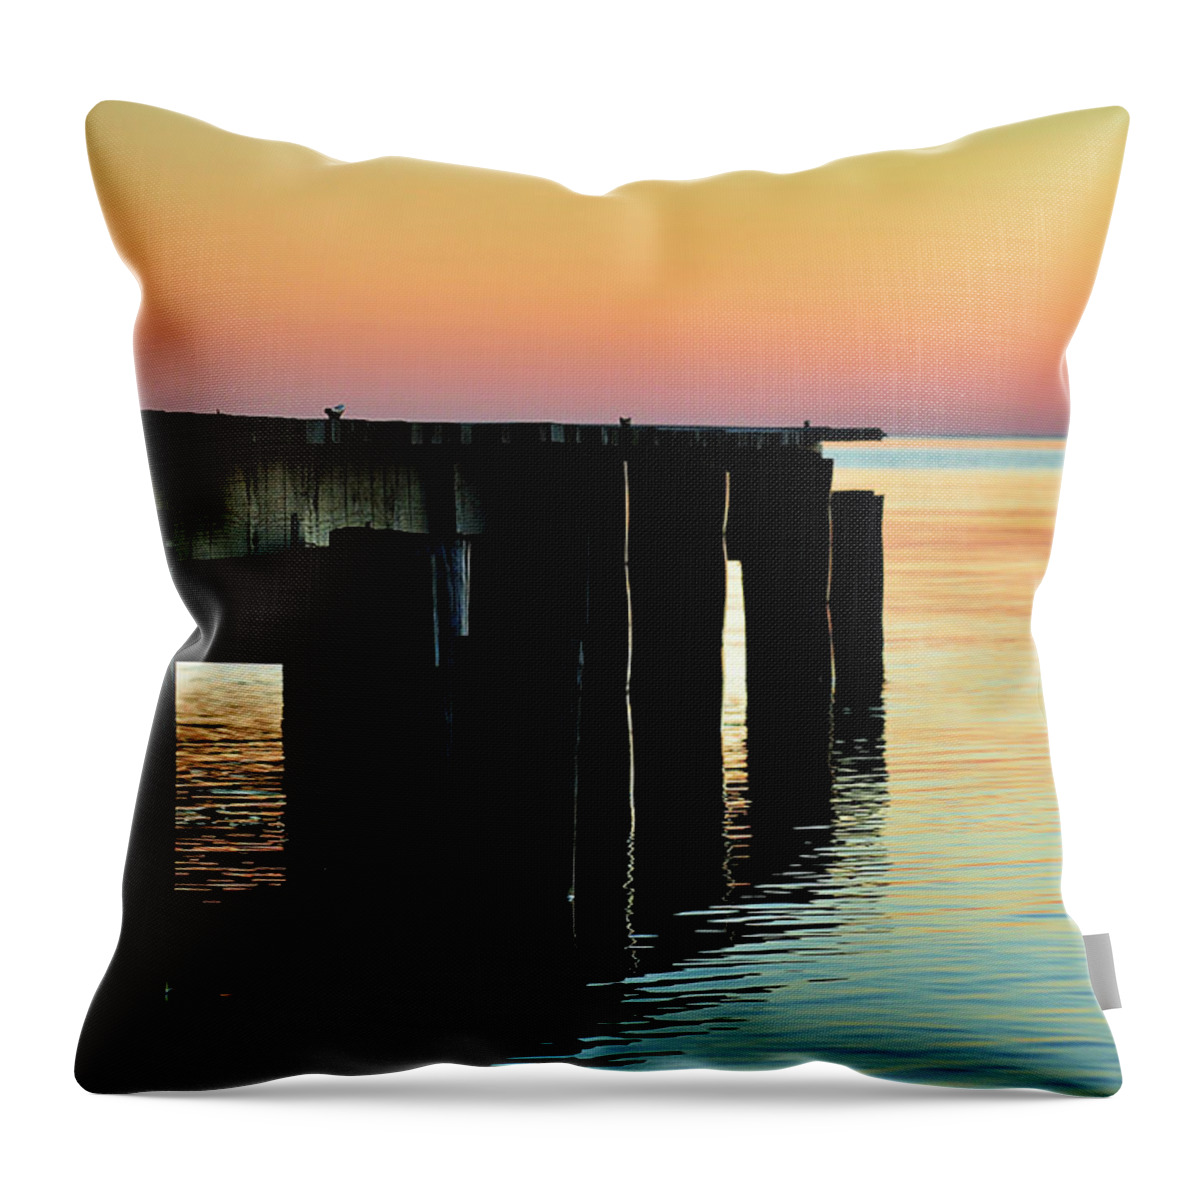 Sunrise Throw Pillow featuring the photograph Sunrise Over Chesapeake Bay by Rebecca Sherman